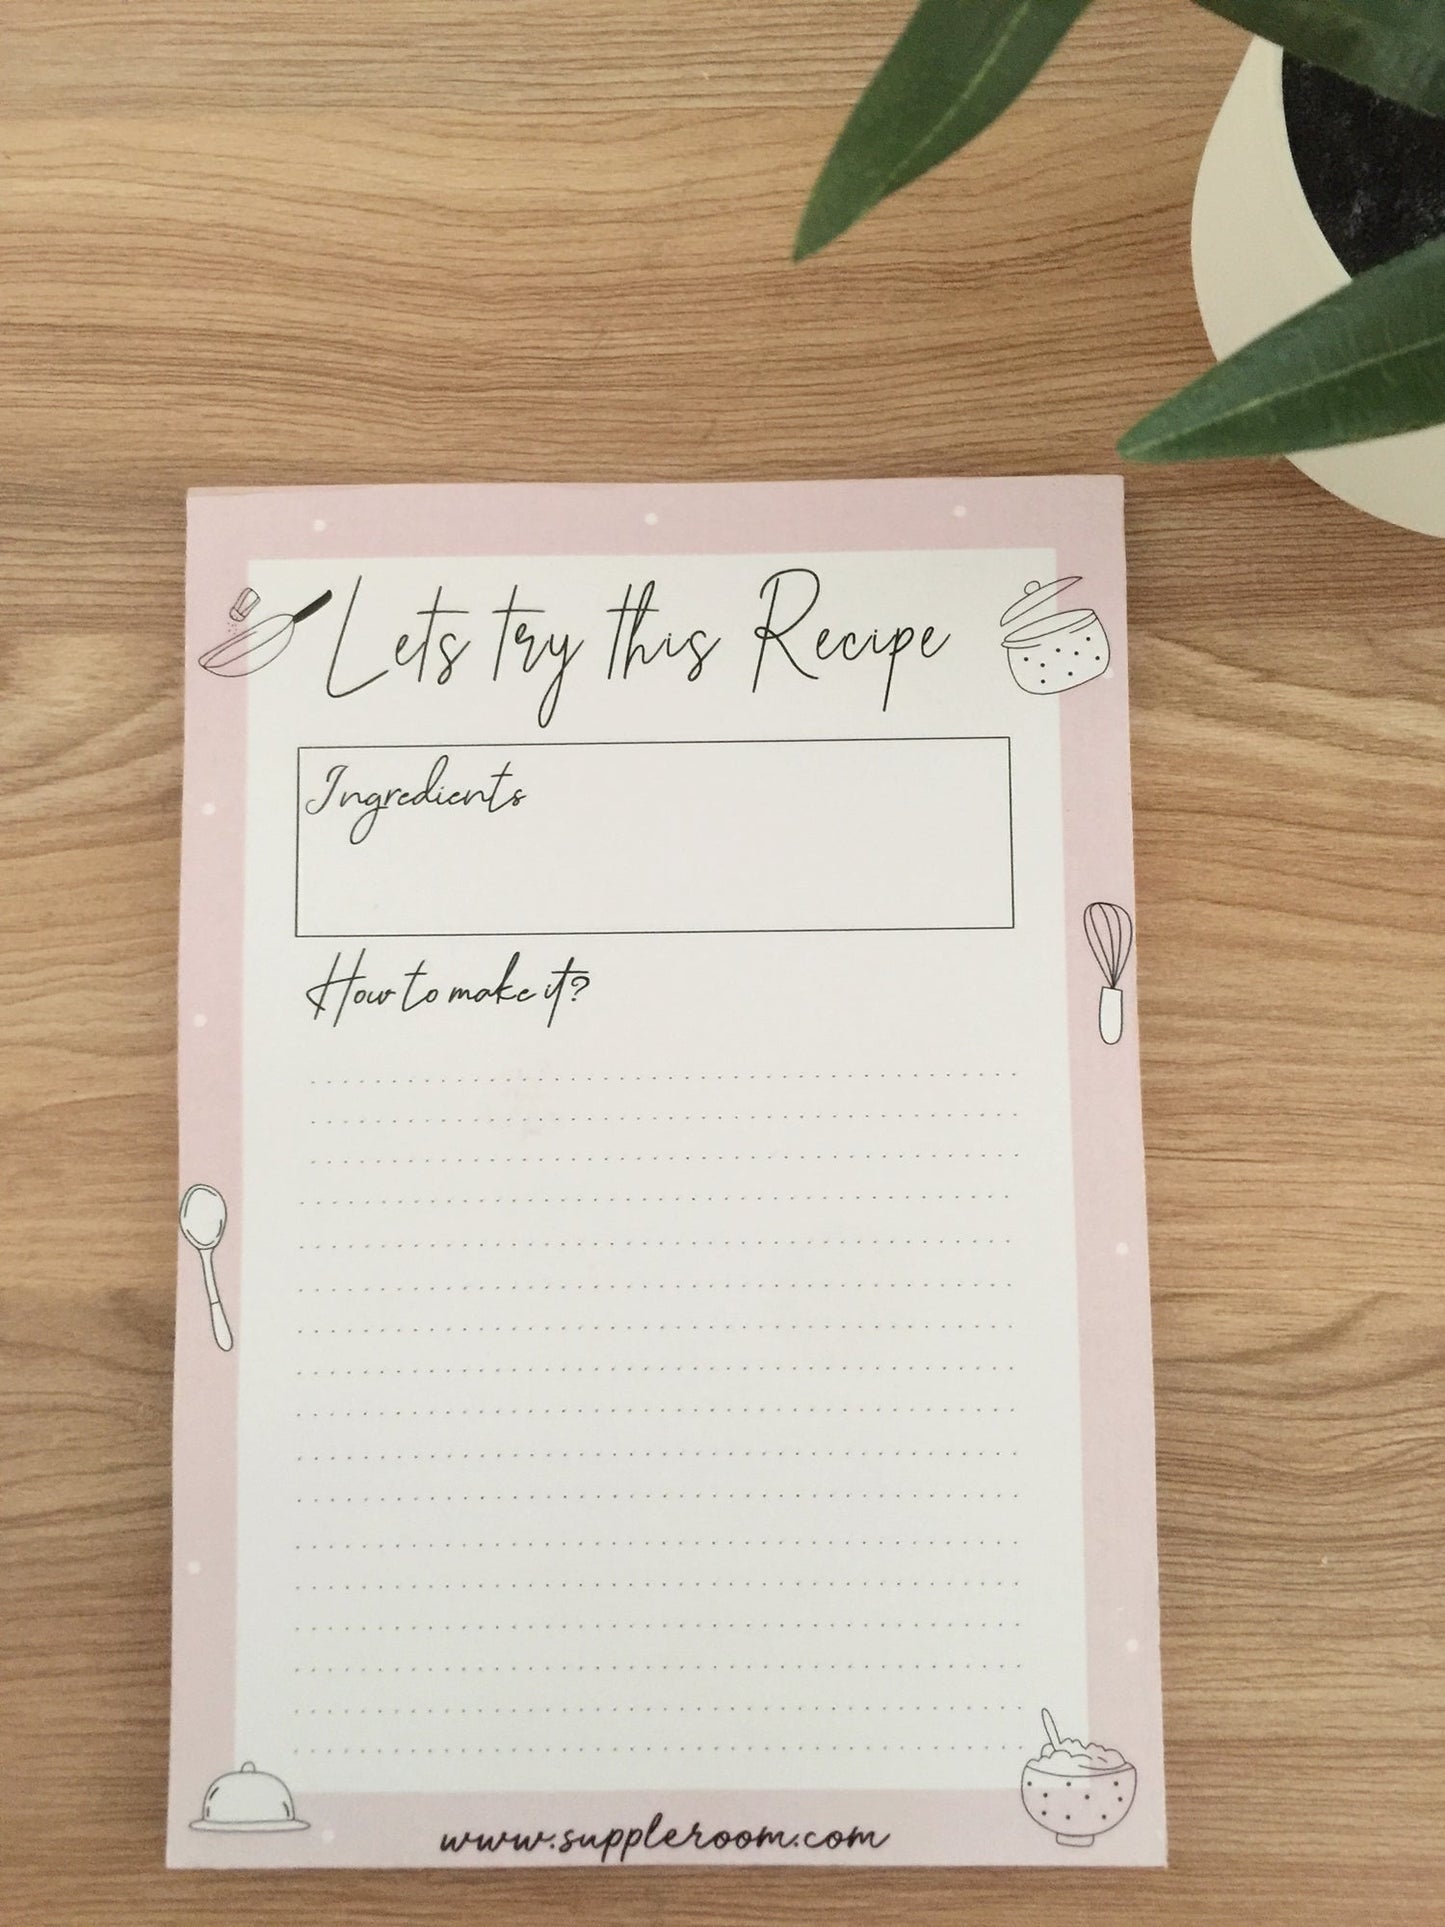 Let's Try this! Recipe Pad | A5 size | 50 sheets - Supple Room